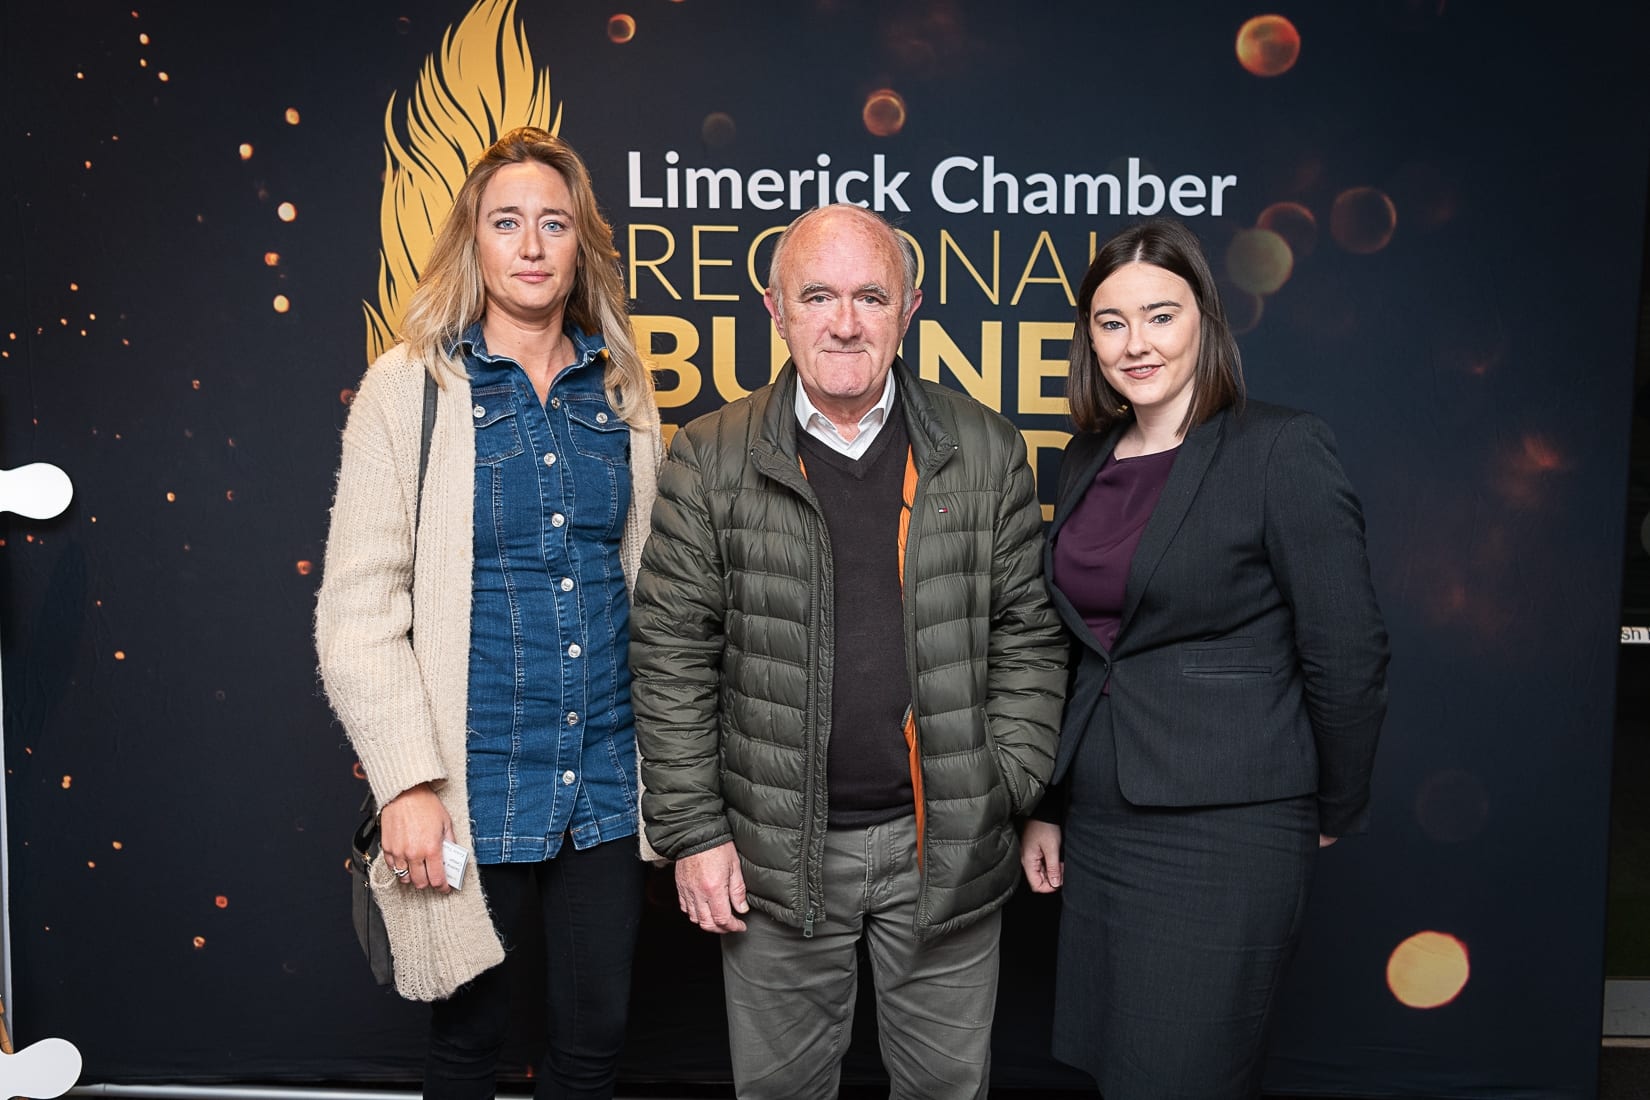 No repro fee-Limerick Chamber President Dinner Shortlist announcement which was held in The Limerick Strand Hotel on Wednesday 16th October  - From Left to Right: Zowie Taylor - Saoirse, Tony Galvin - Saoirse, Teresa O’Keffee - Savoy Hotel
Photo credit Shauna Kennedy